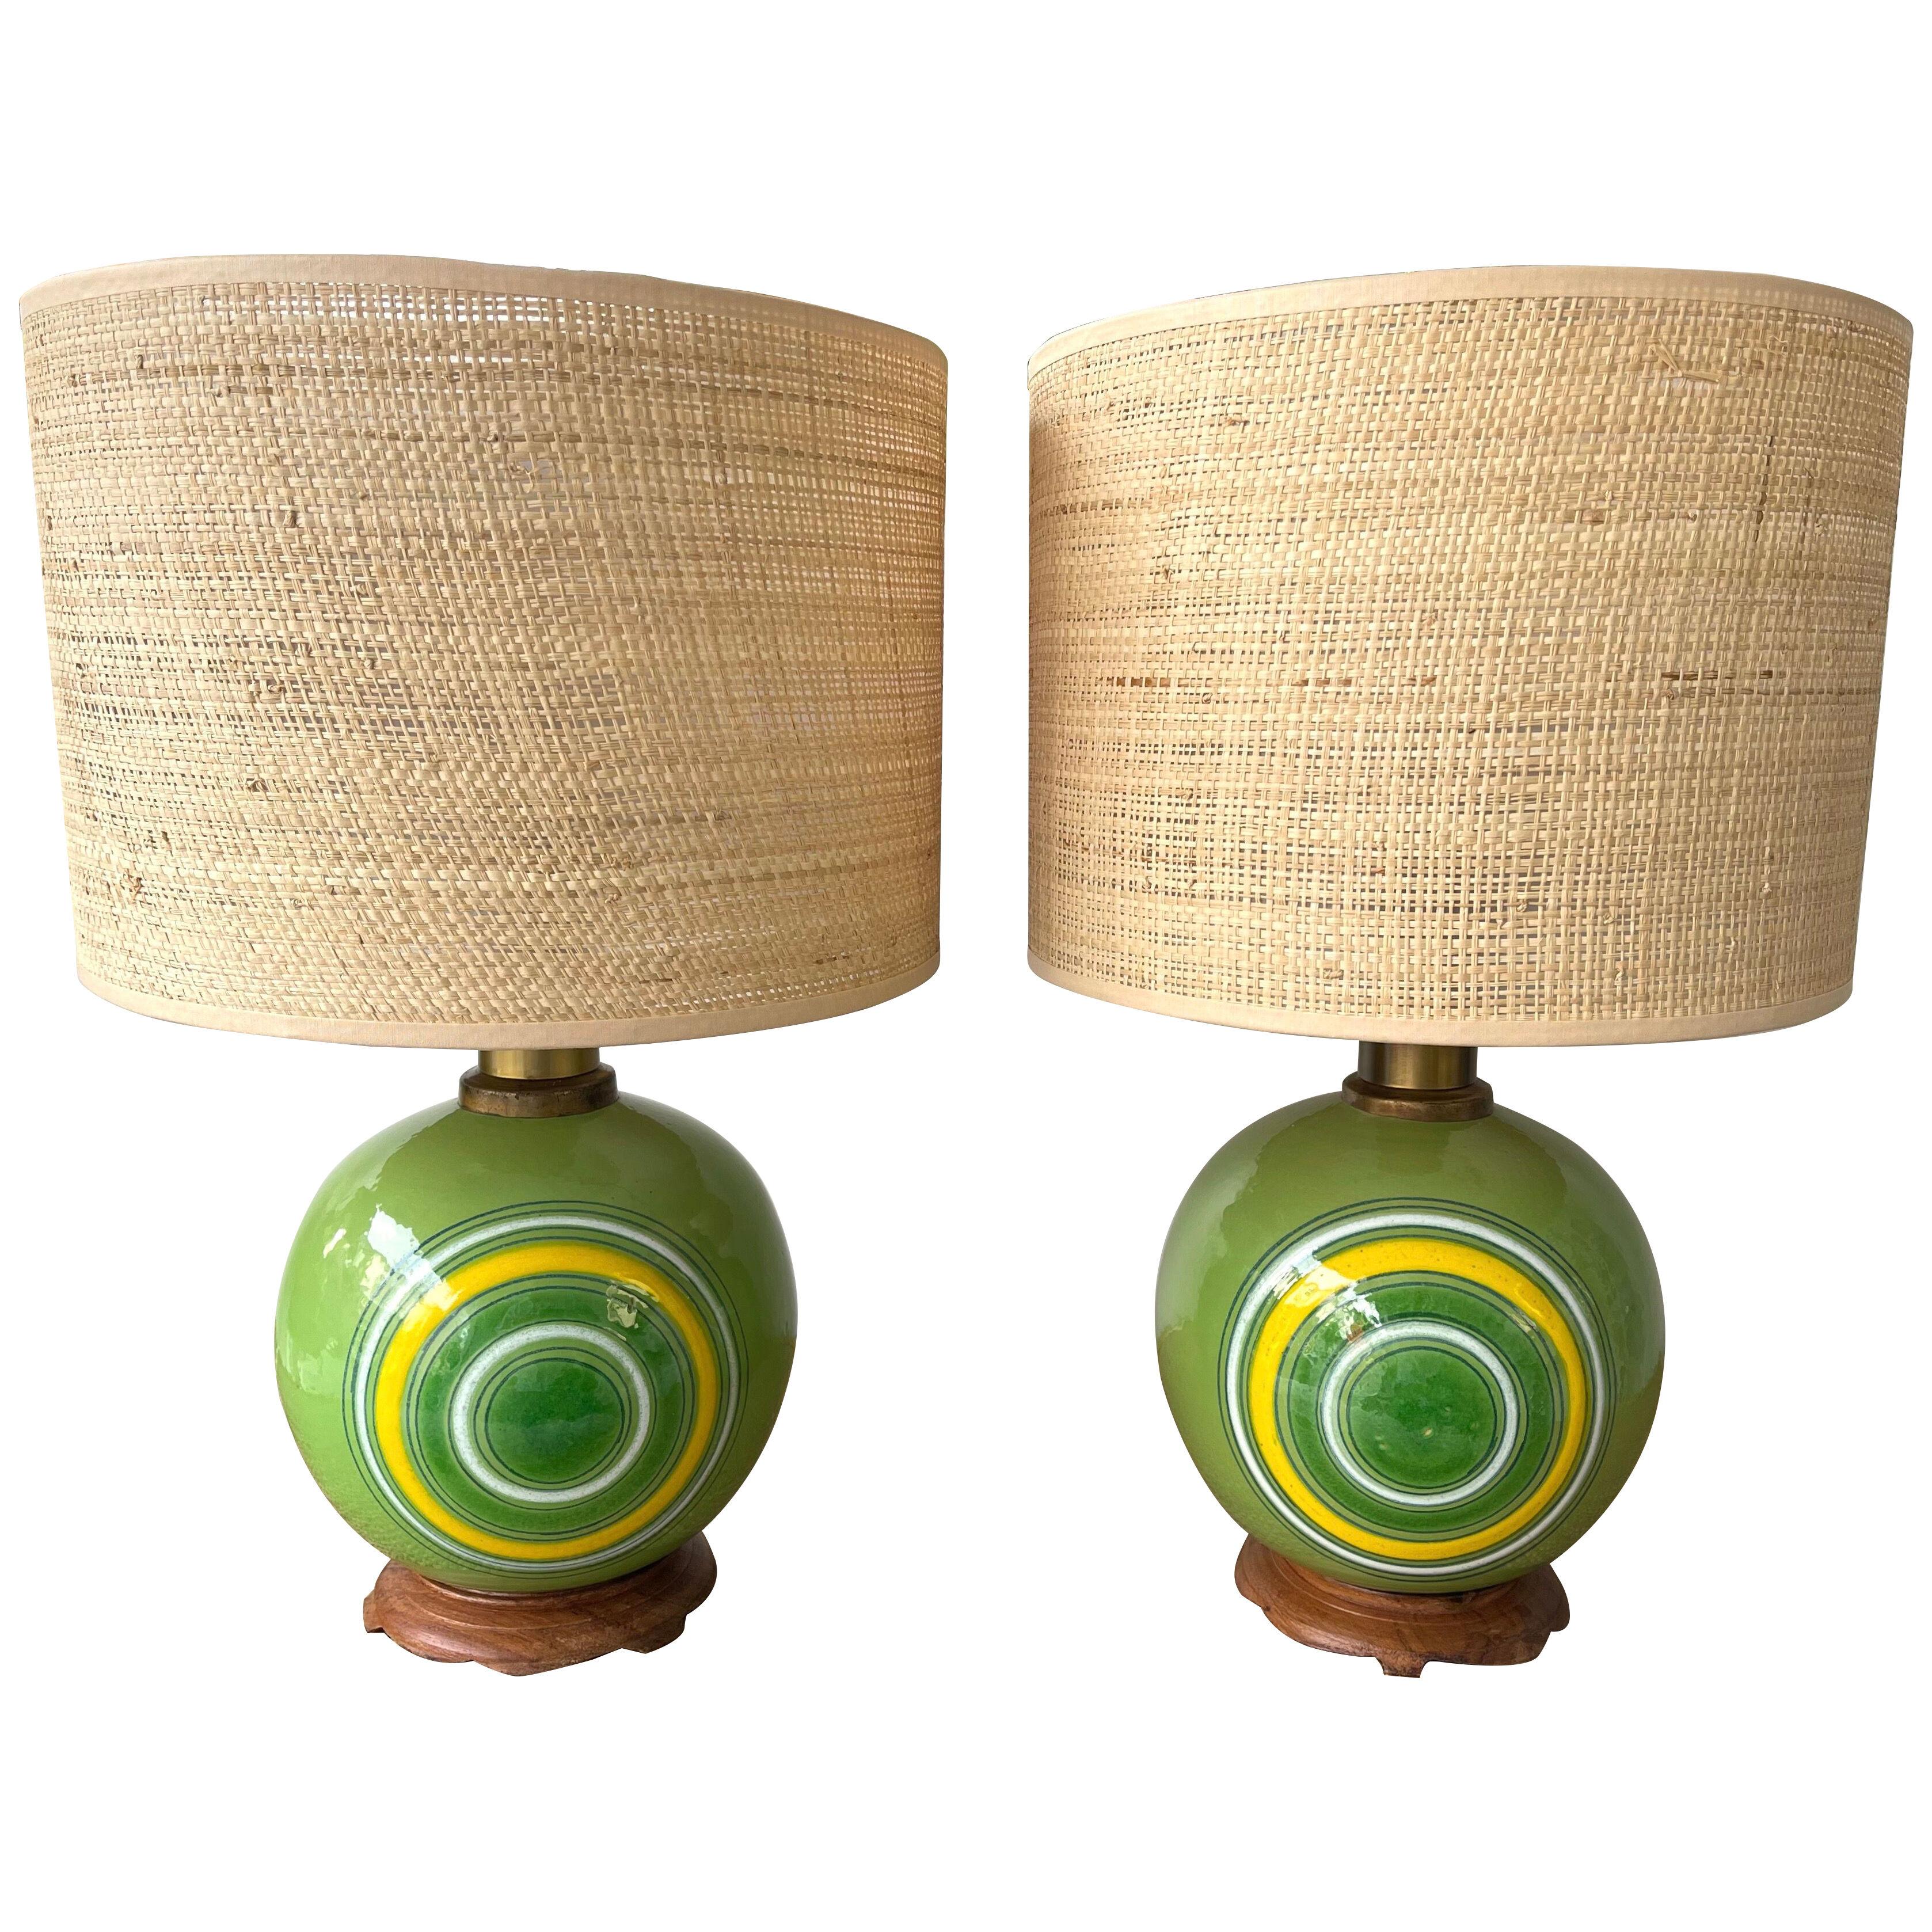 Pair of Ceramic and Brass Lamps by Aldo Londi for Bitossi. Italy, 1970s